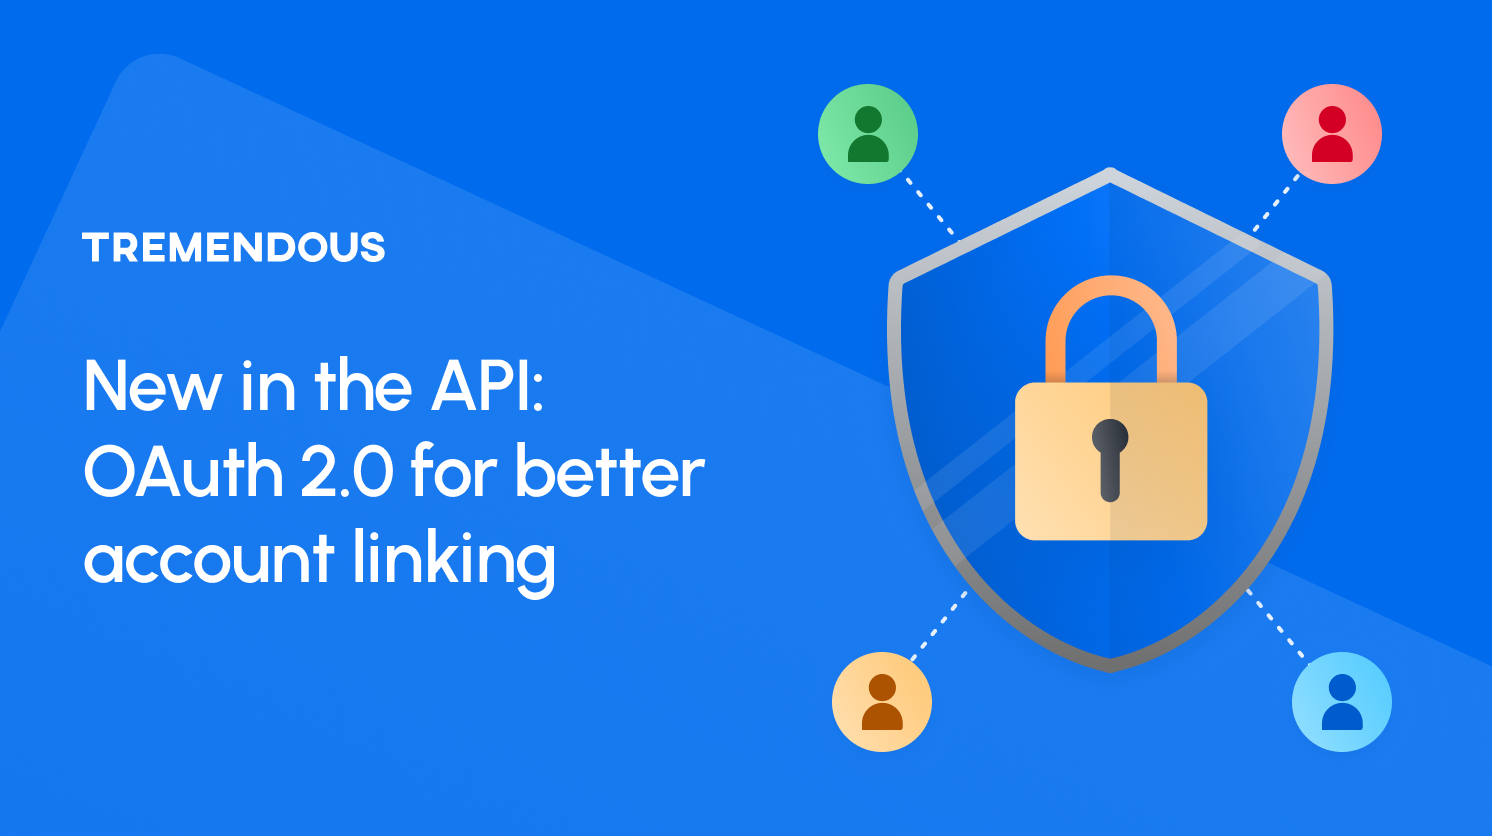 New in the API: OAuth 2.0 for better account linking